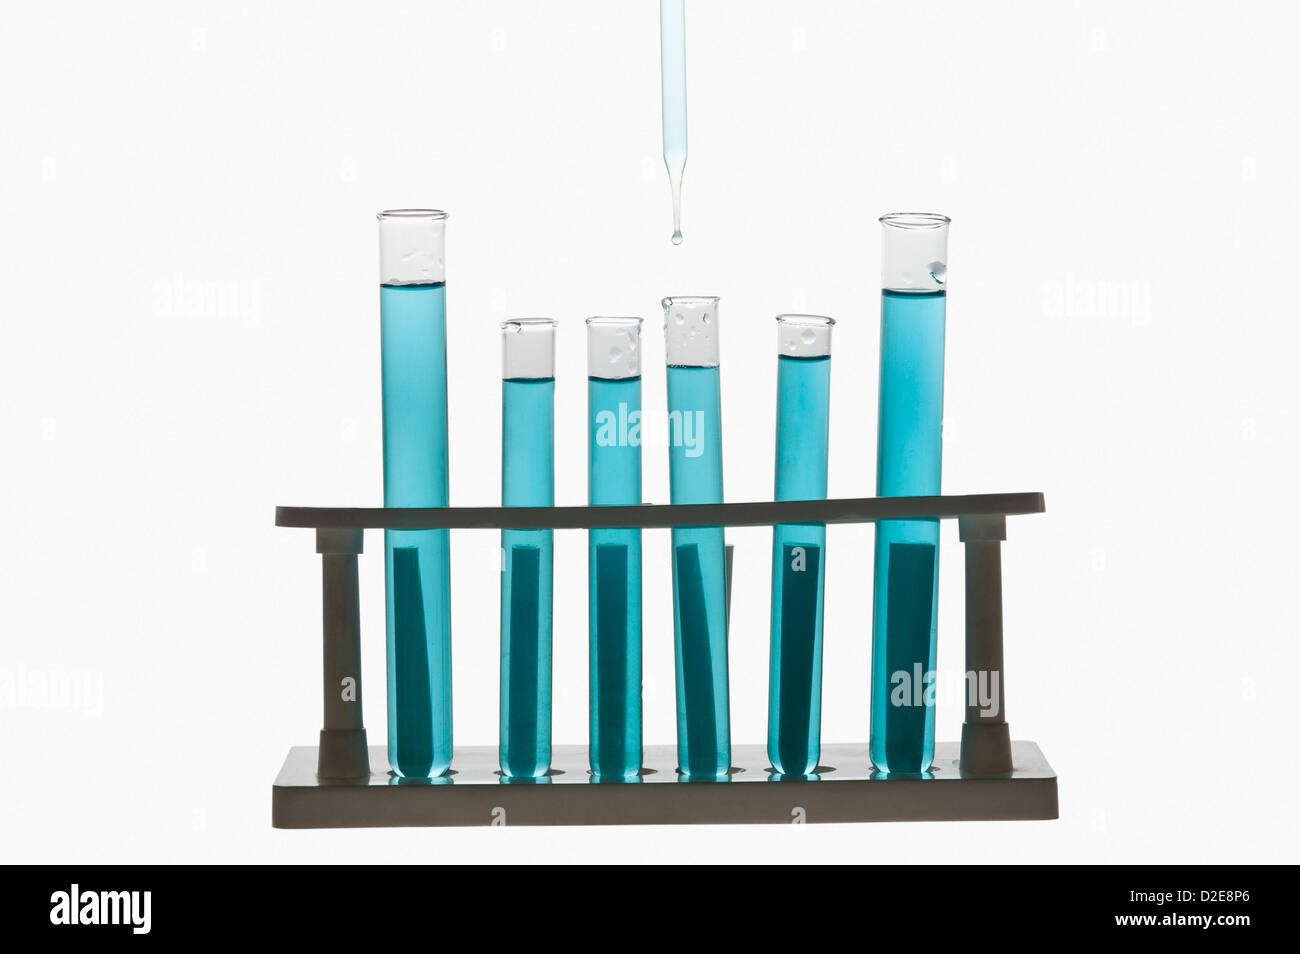 Close-up of a test tube rack with test tubes Stock Photo